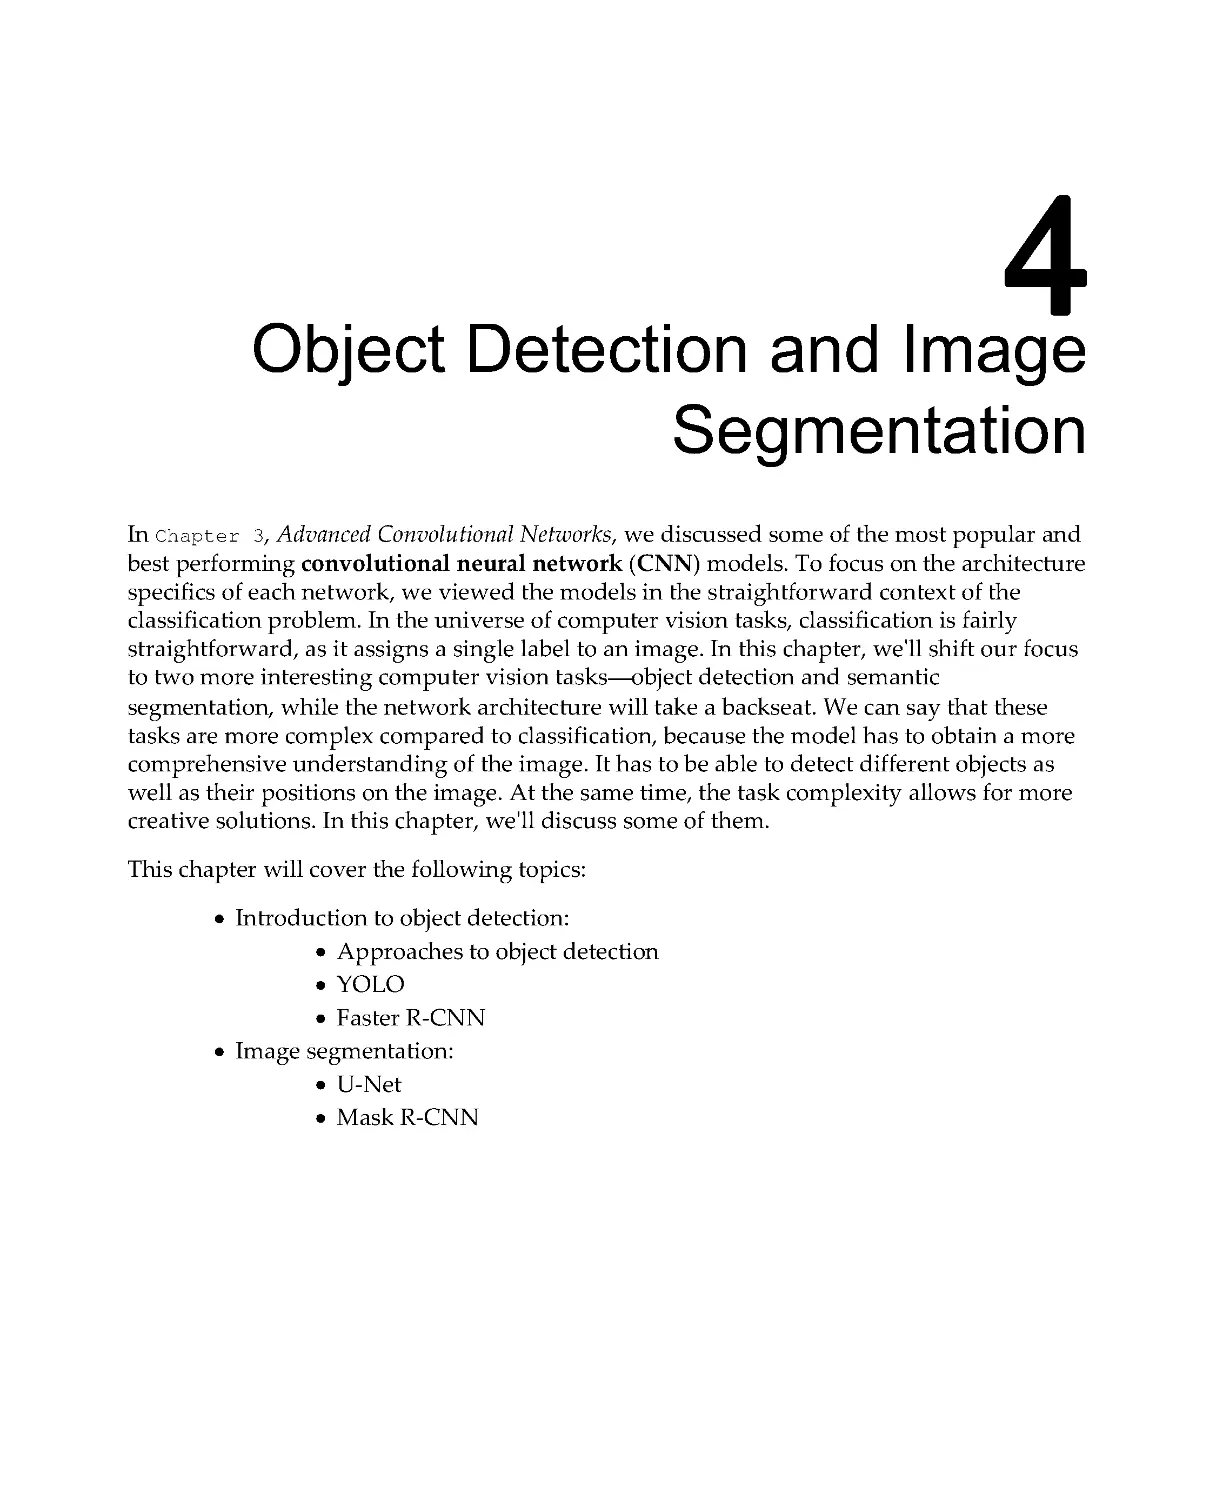 Chapter 4: Object Detection and Image Segmentation